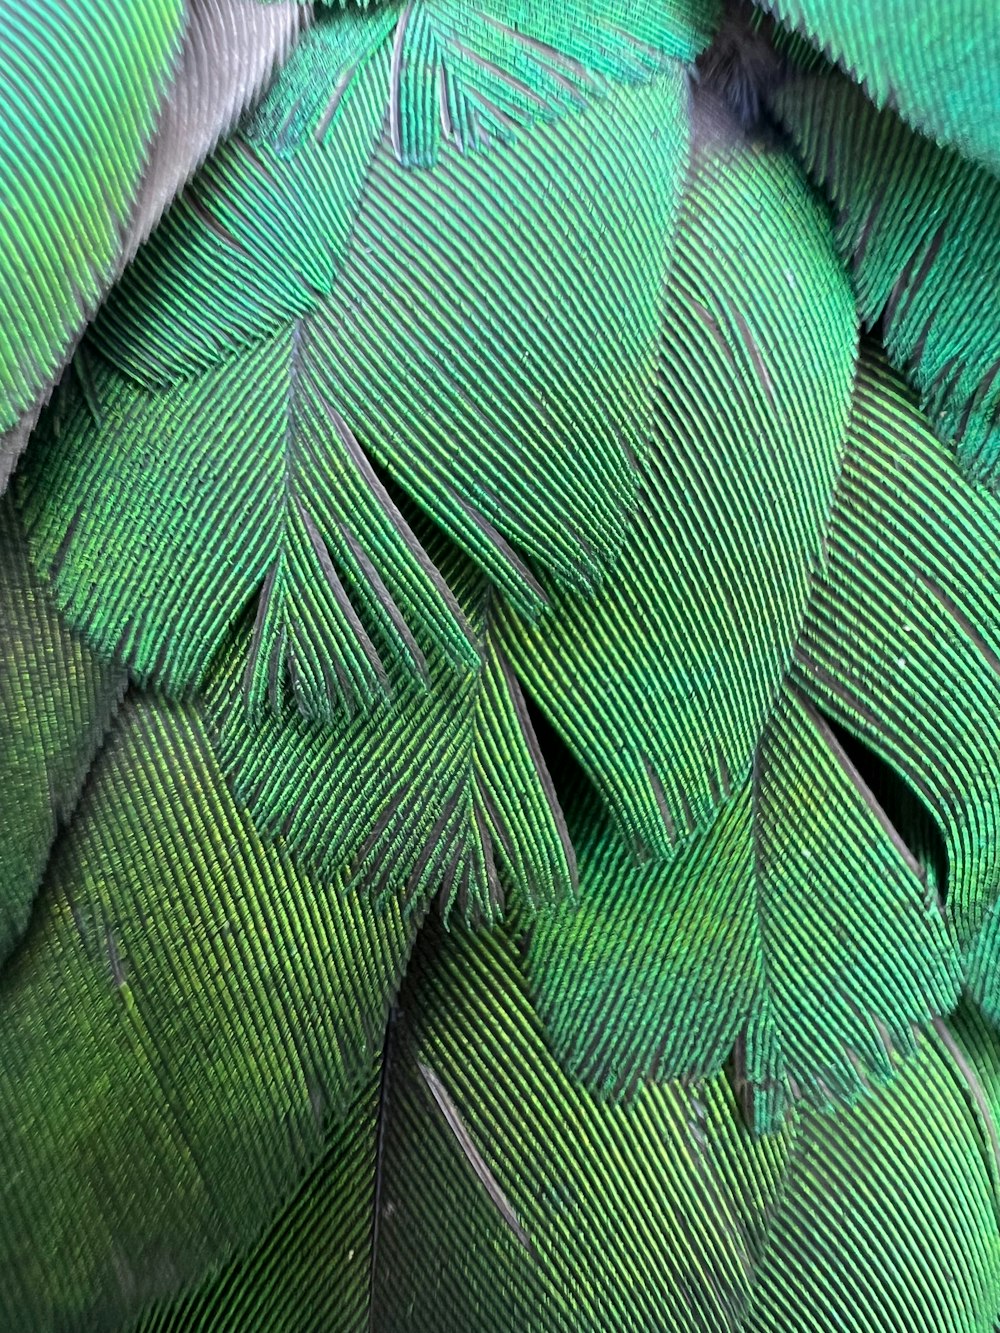 a close up of a green bird's feathers